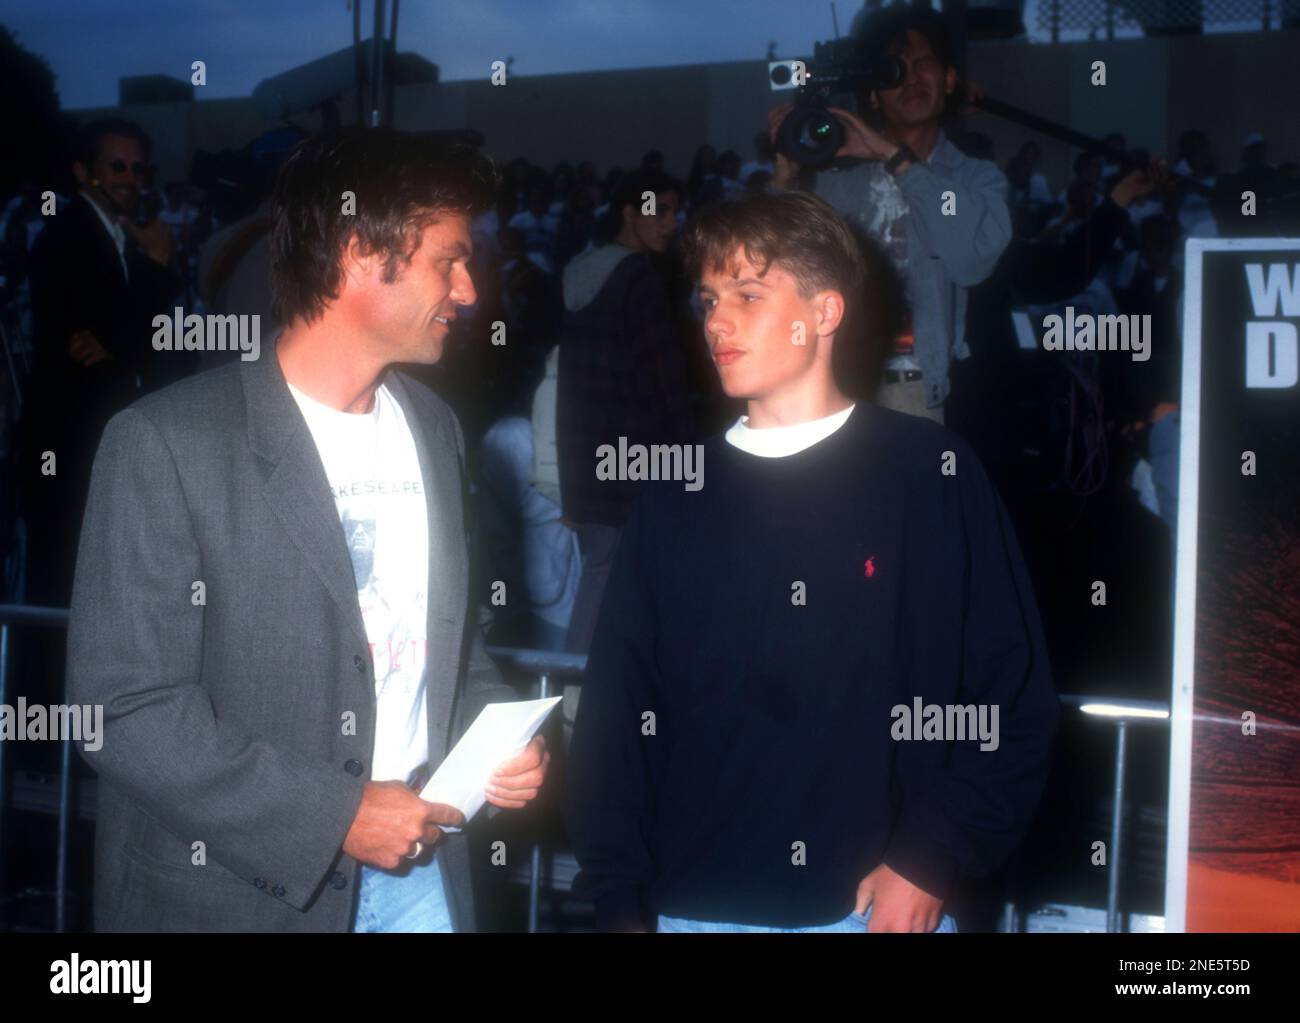 Los Angeles, California, USA 25th June 1996 Harry Hamlin and son Dimitri Alexander Hamlin attend 20th Century Fox' 'Independence Day' Premiere at Mann Village Theatre on June 25, 1996 in Los Angeles, California, USA. Photo by Barry King/Alamy Stock Photo Stock Photo